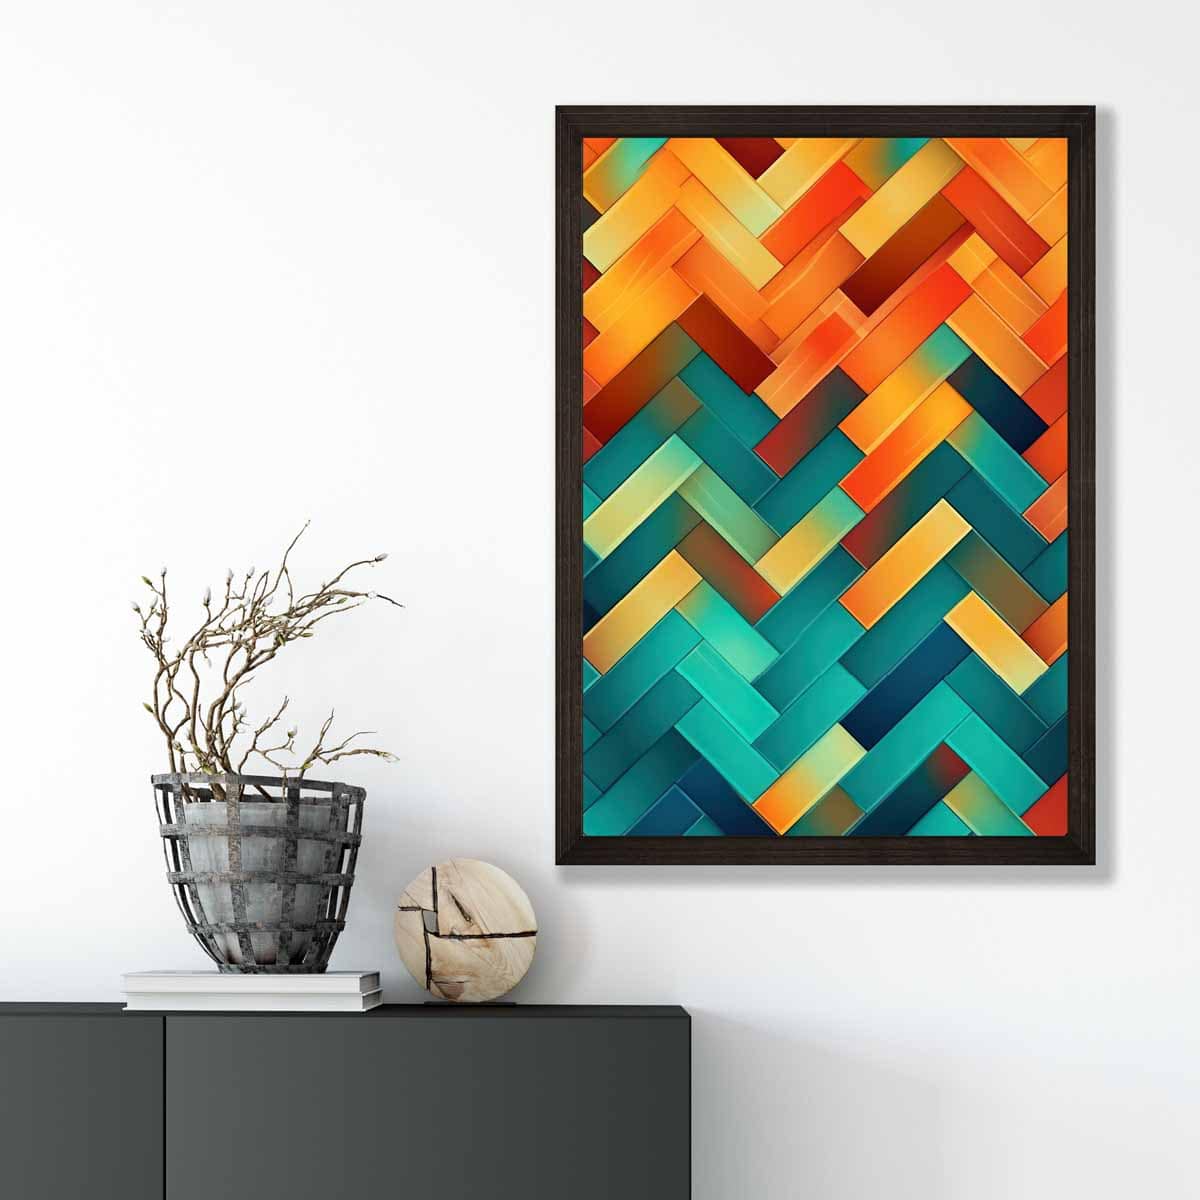 Abstract Geometric Shapes Art Print Teal Blue Orange and Red No 3